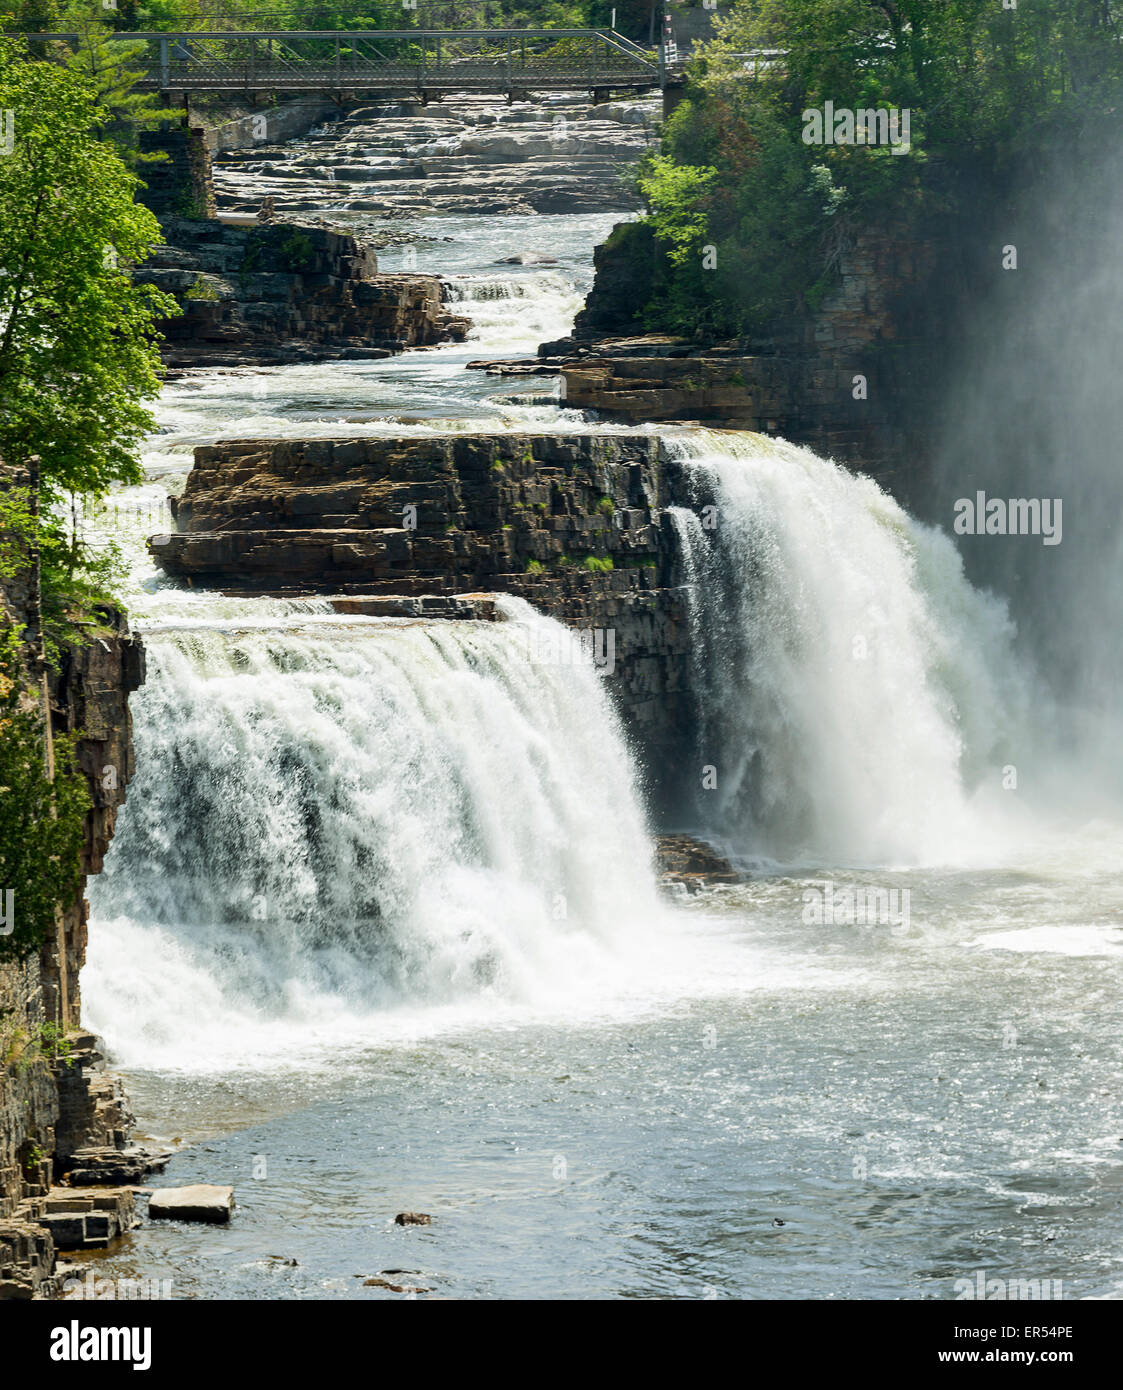 Panoramic view of the Upper Bridge and the Rainbow Falls on Ausable river in Keeseville, Upstate New York. Stock Photo